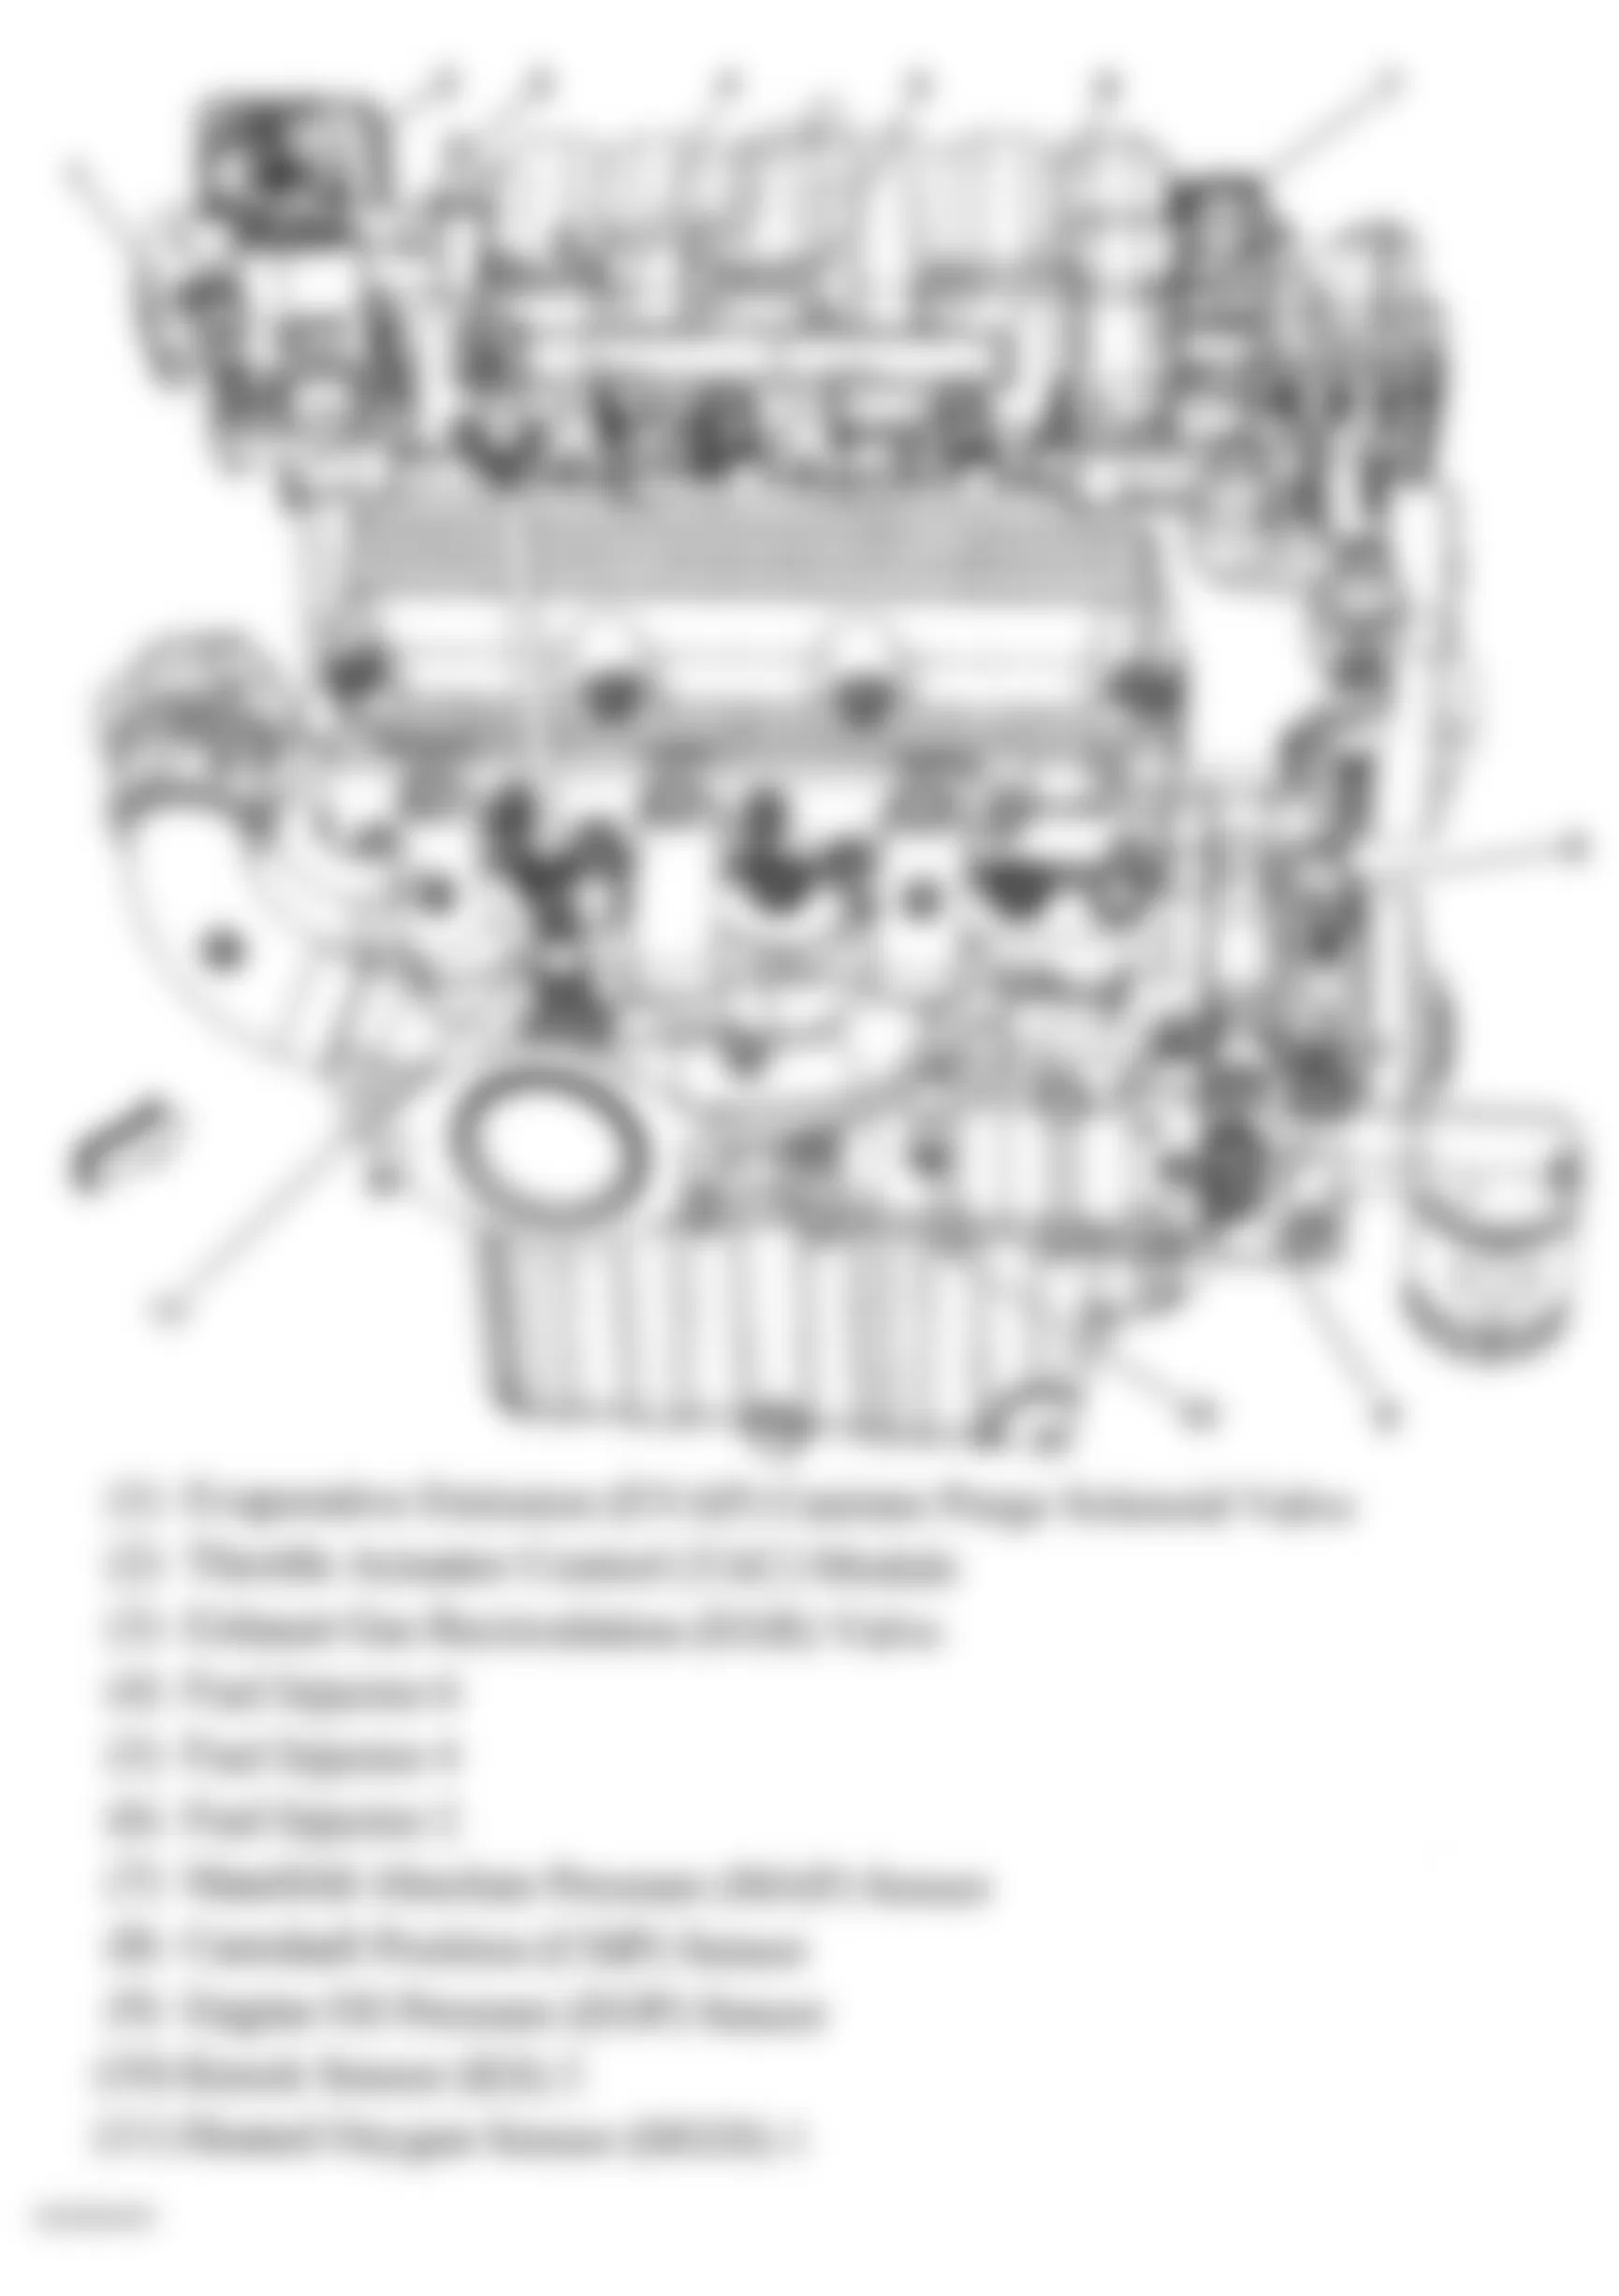 Buick LaCrosse CXL 2008 - Component Locations -  Right Side Of Engine (3.8L)